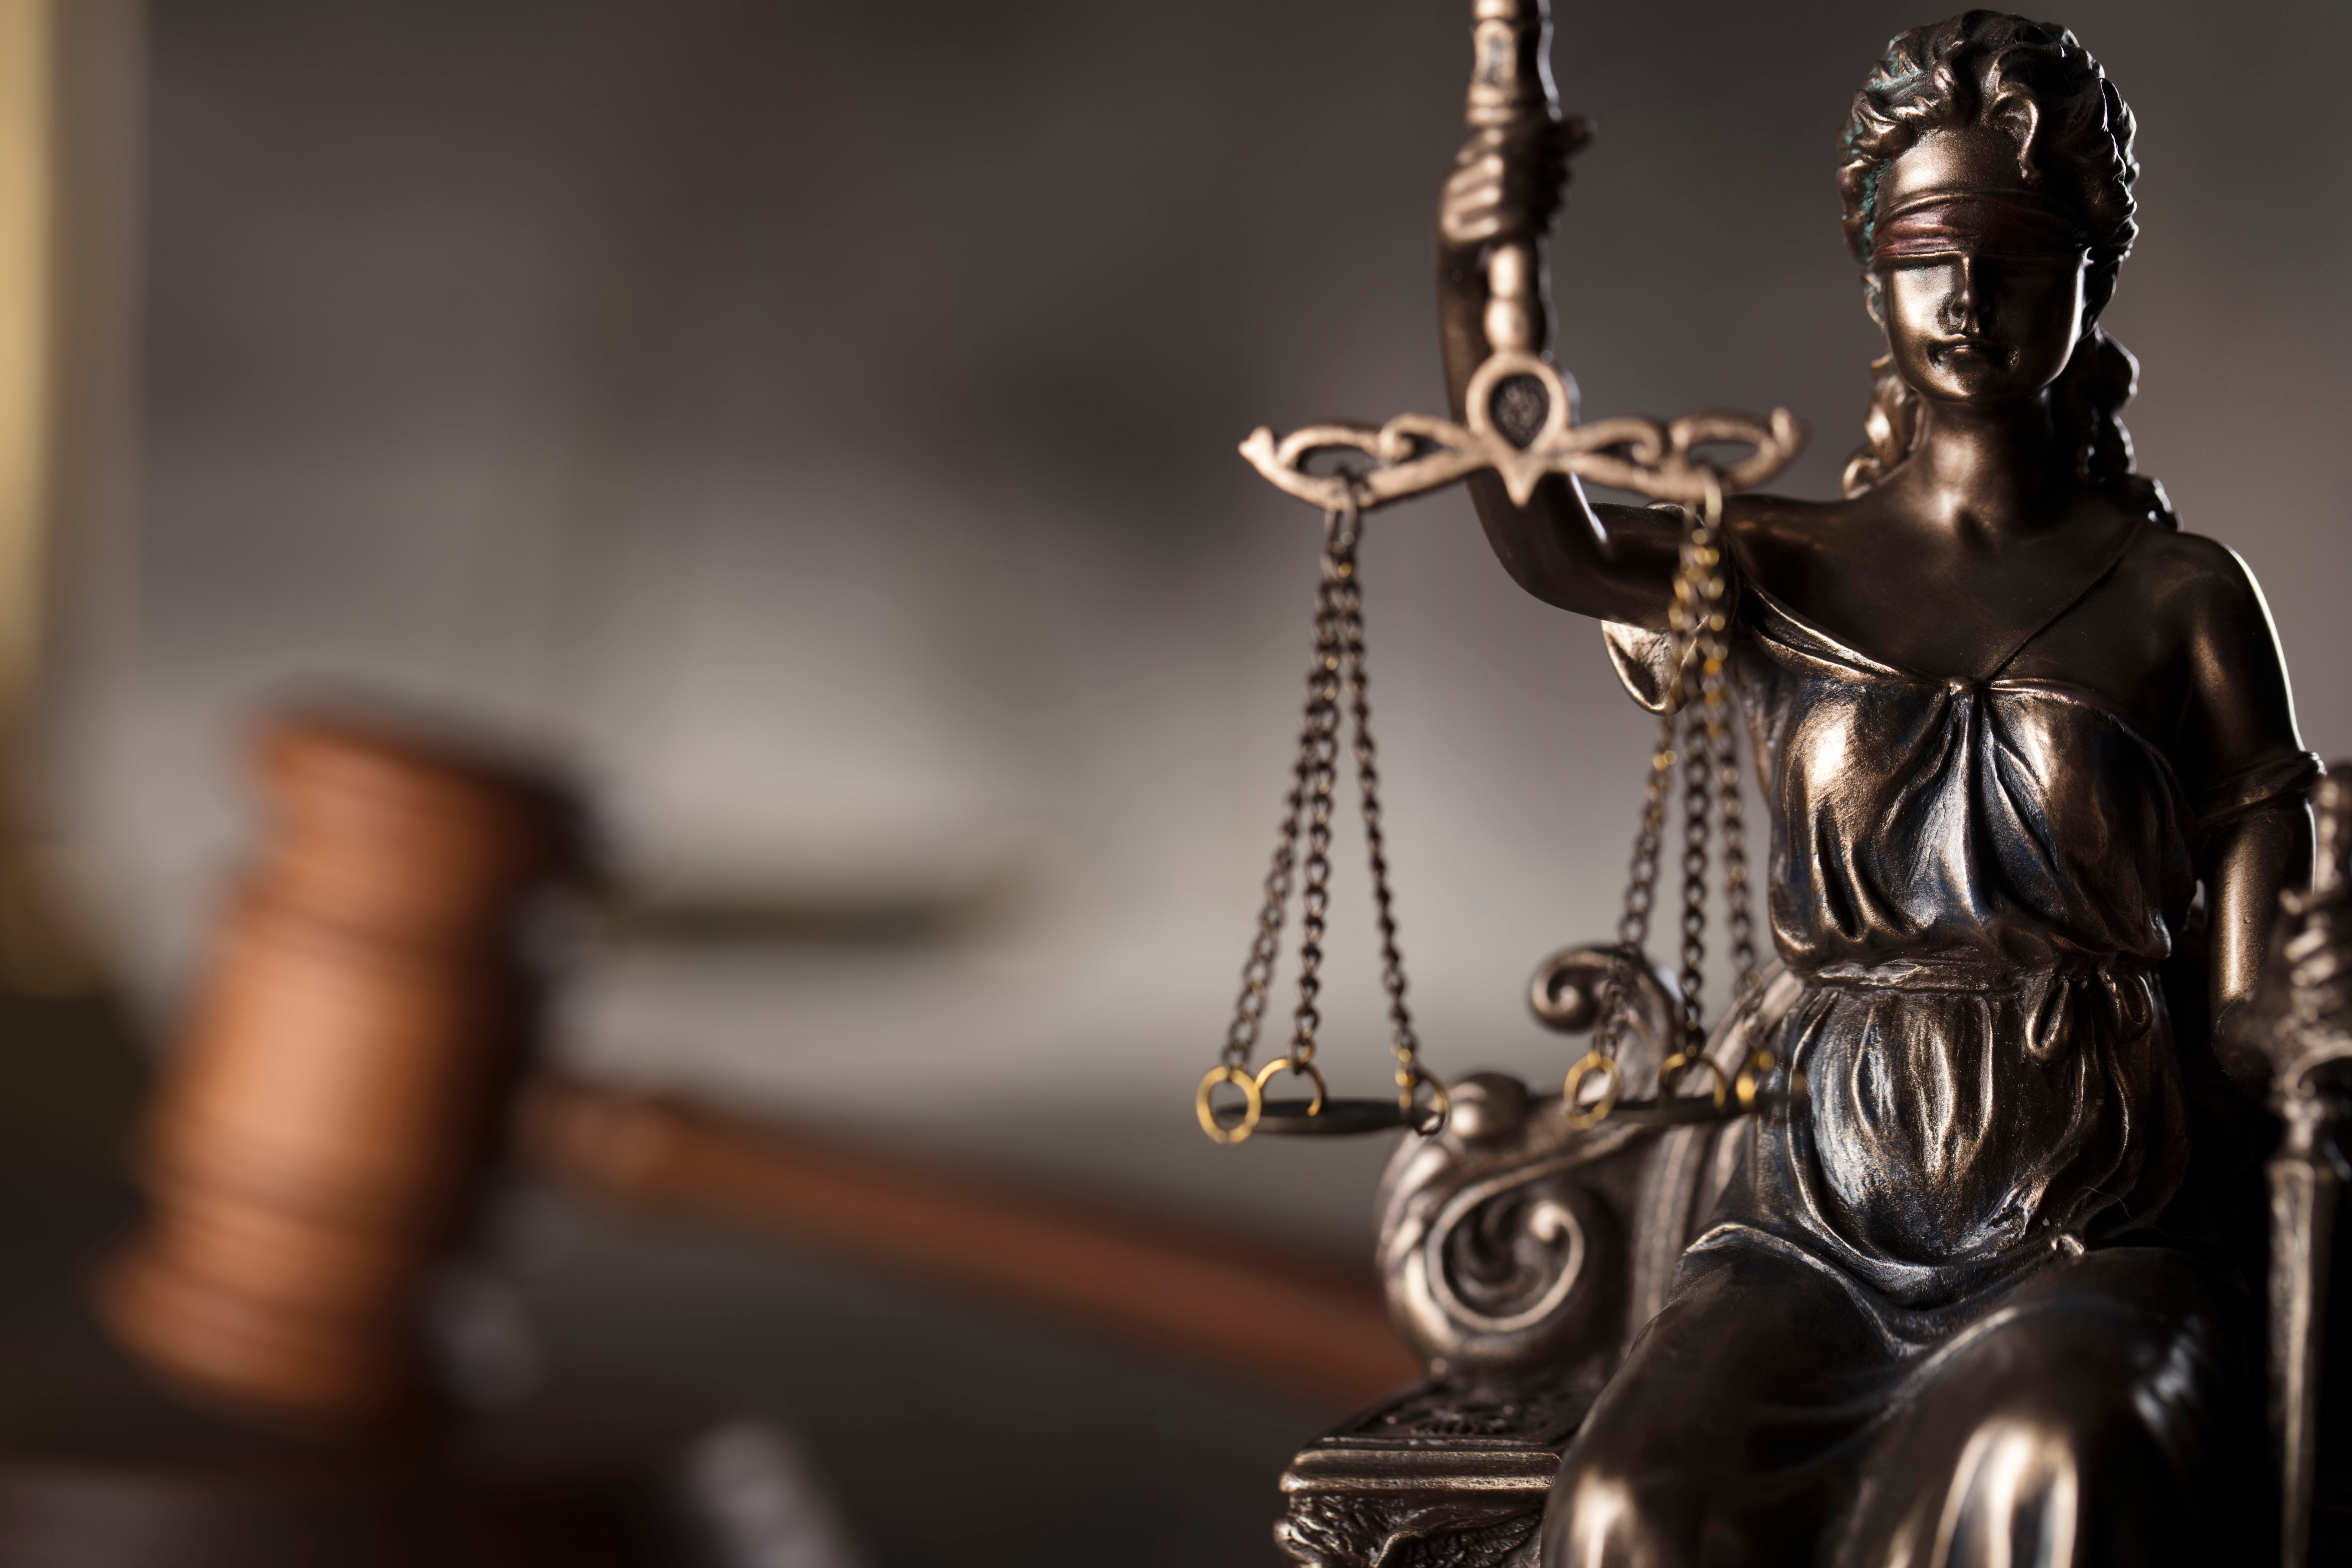 Trucking Industry Applauds as Litigation Reform Law Takes Effect